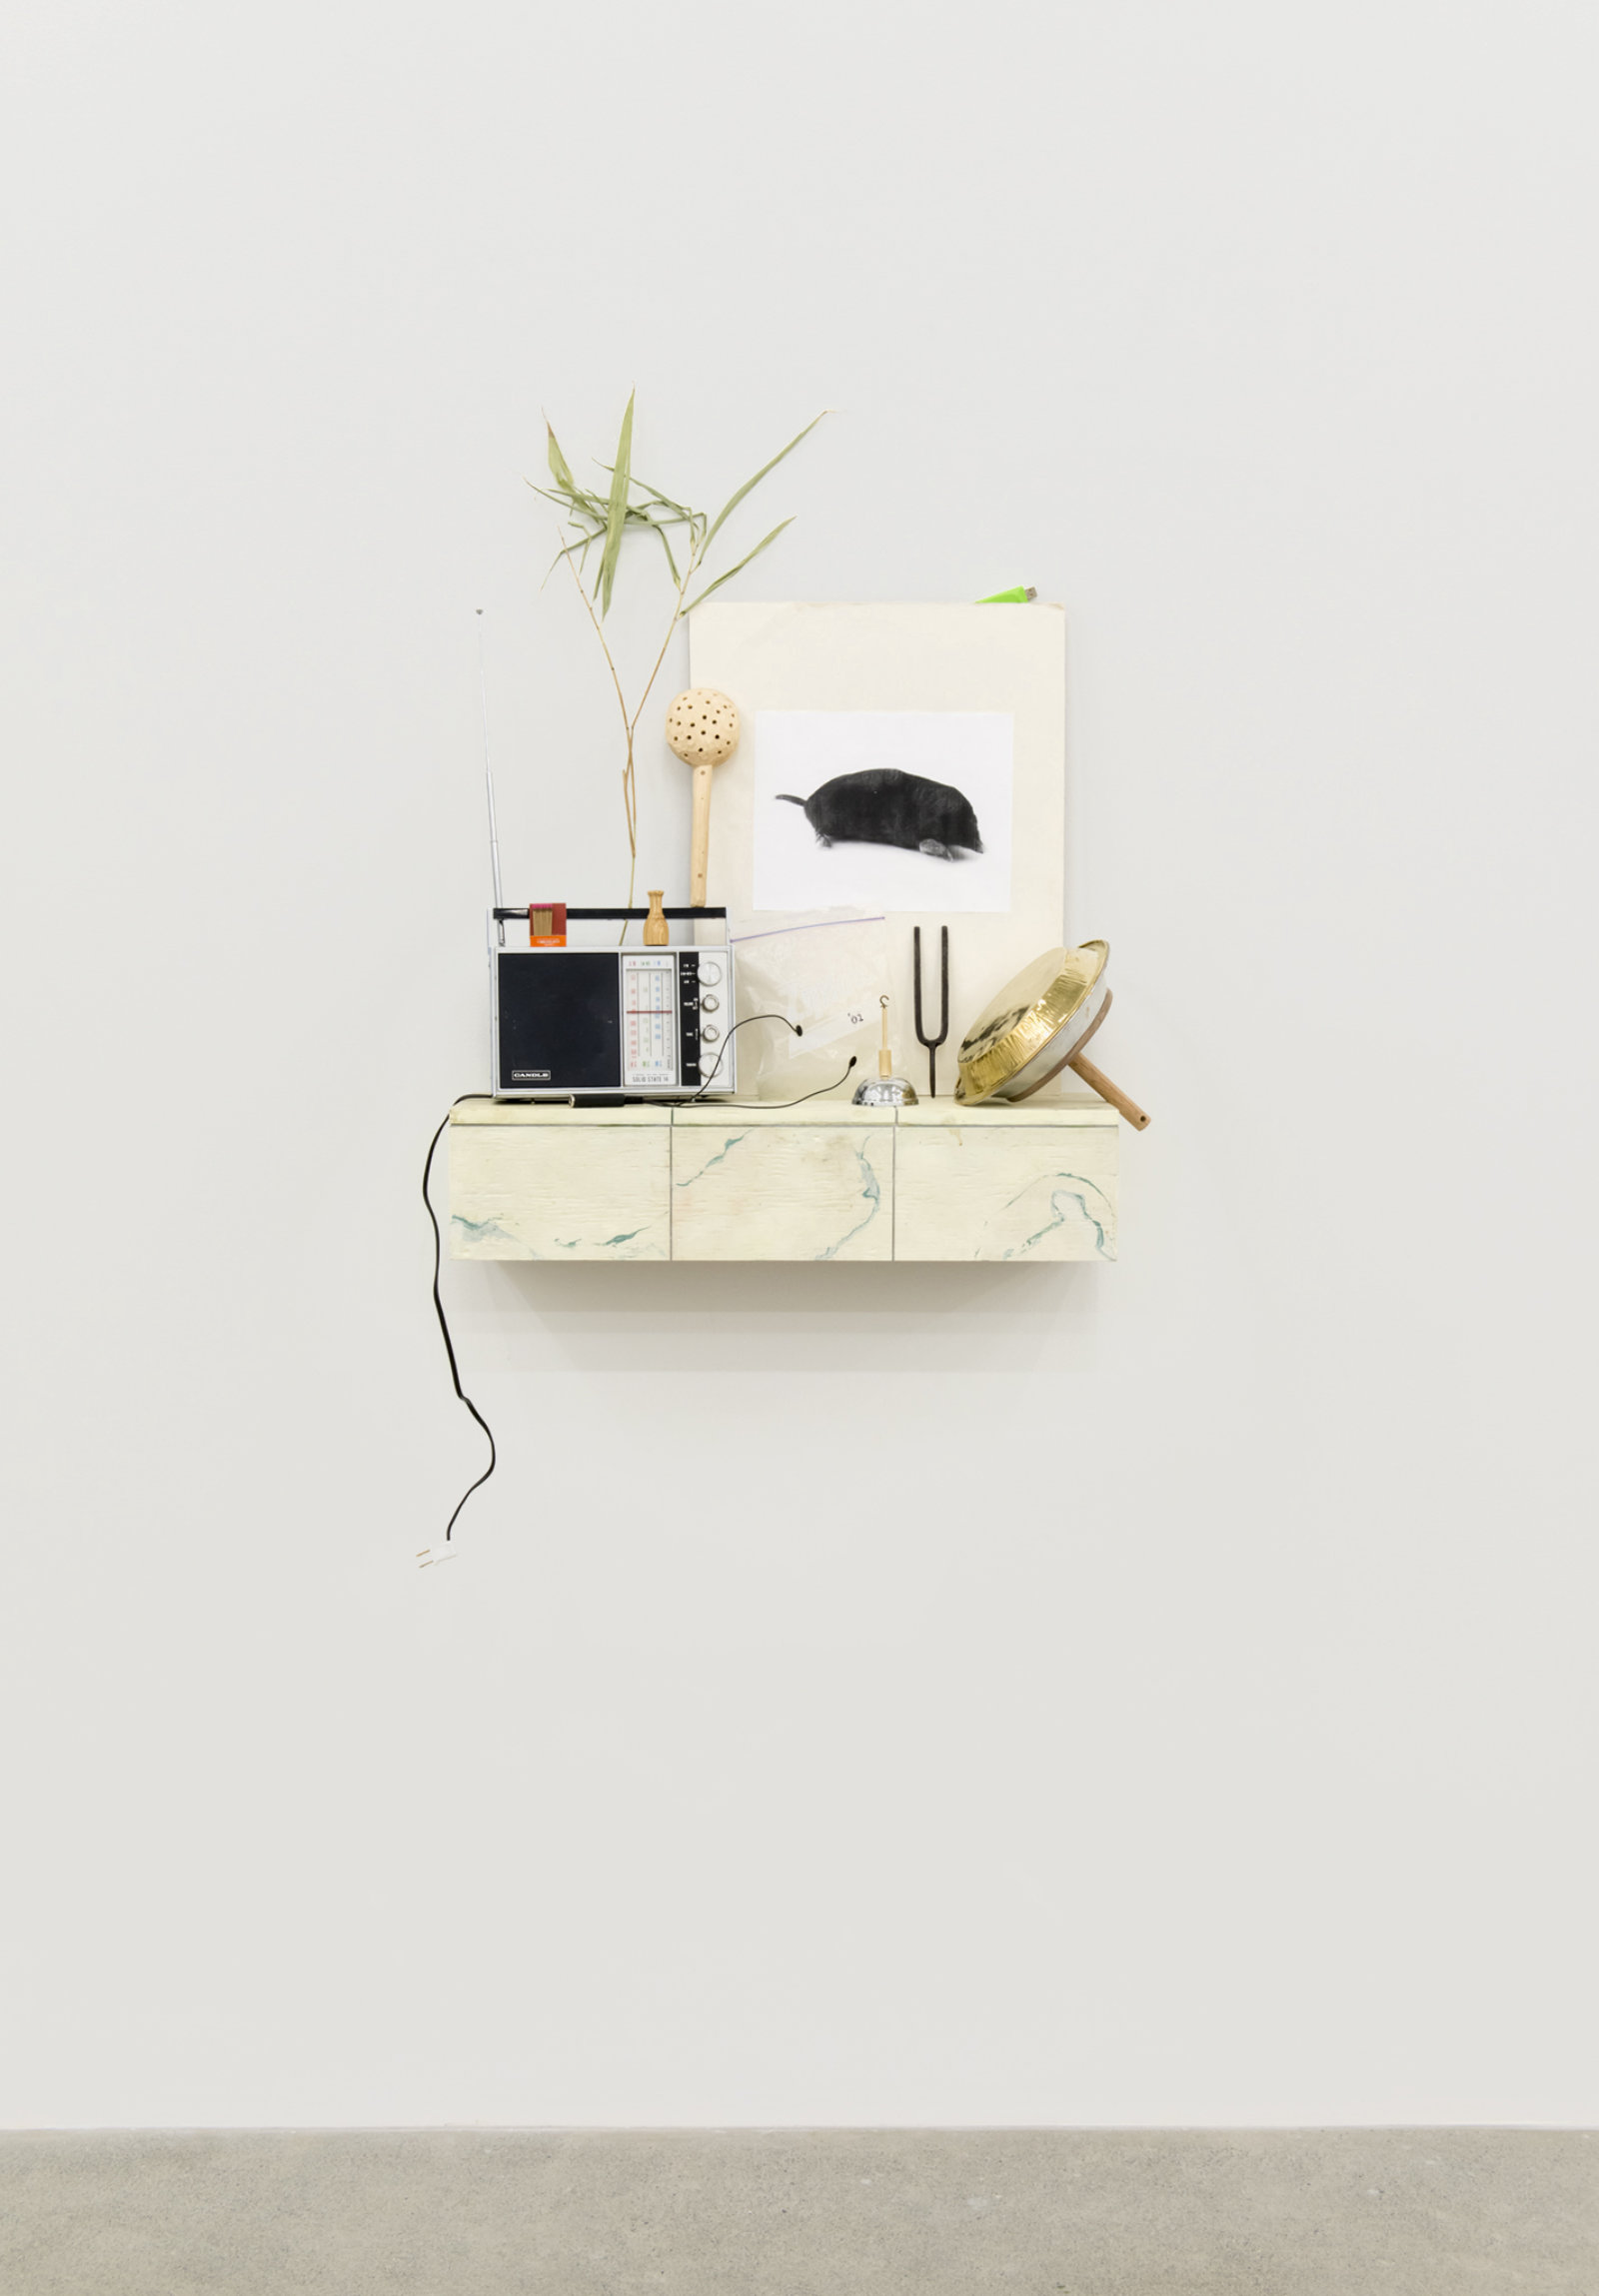 Ashes Withyman, Cetus, Compass, River, Furnas, Musca, Altar, Cup, 2017–2018, radio, matches, animal call, wood and stone rattle, photocopy, grass, usb flash drive, gold plated tin, sand, ziploc bag with contact microphone, tuning fork, dried grass, bell, painted plywood, 52 x 29 x 9 in. (132 x 74 x 23 cm)